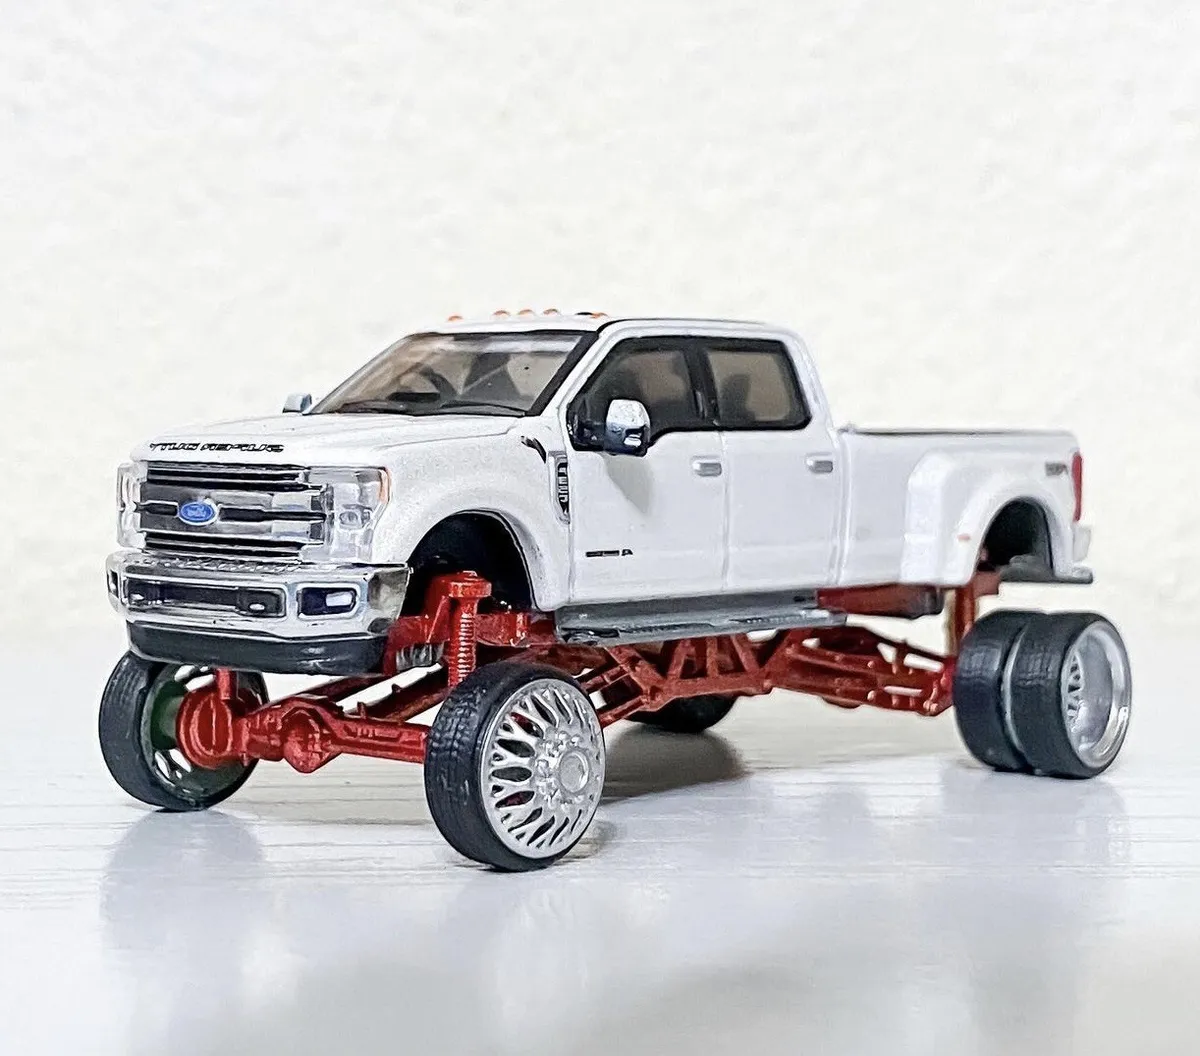 Ford f dually lifted truck frametruck body and wheels not included